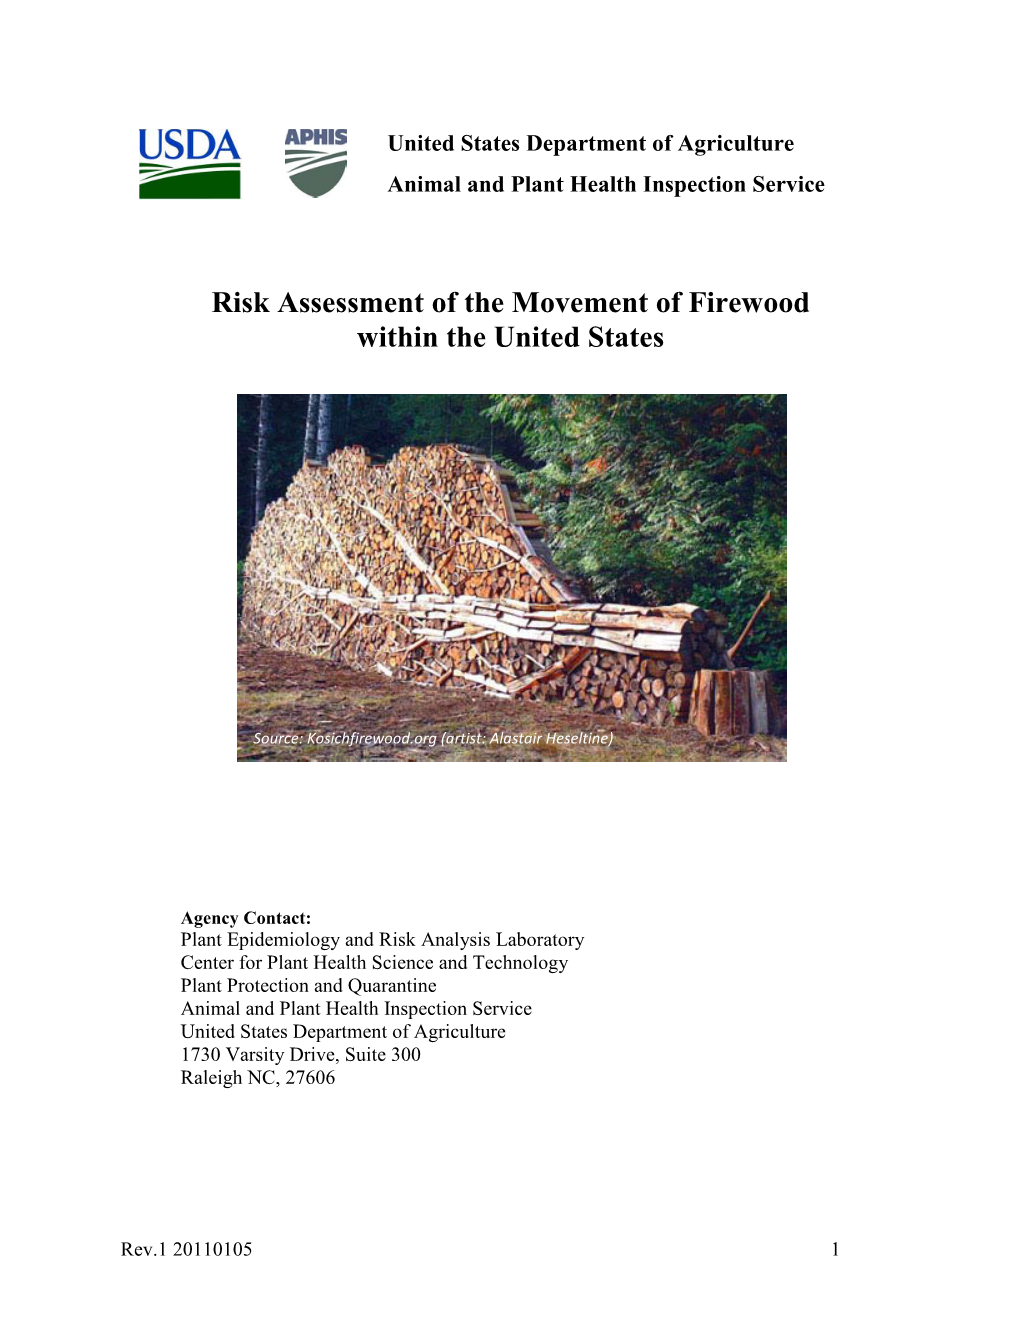 Risk Assessment of the Movement of Firewood Within the United States